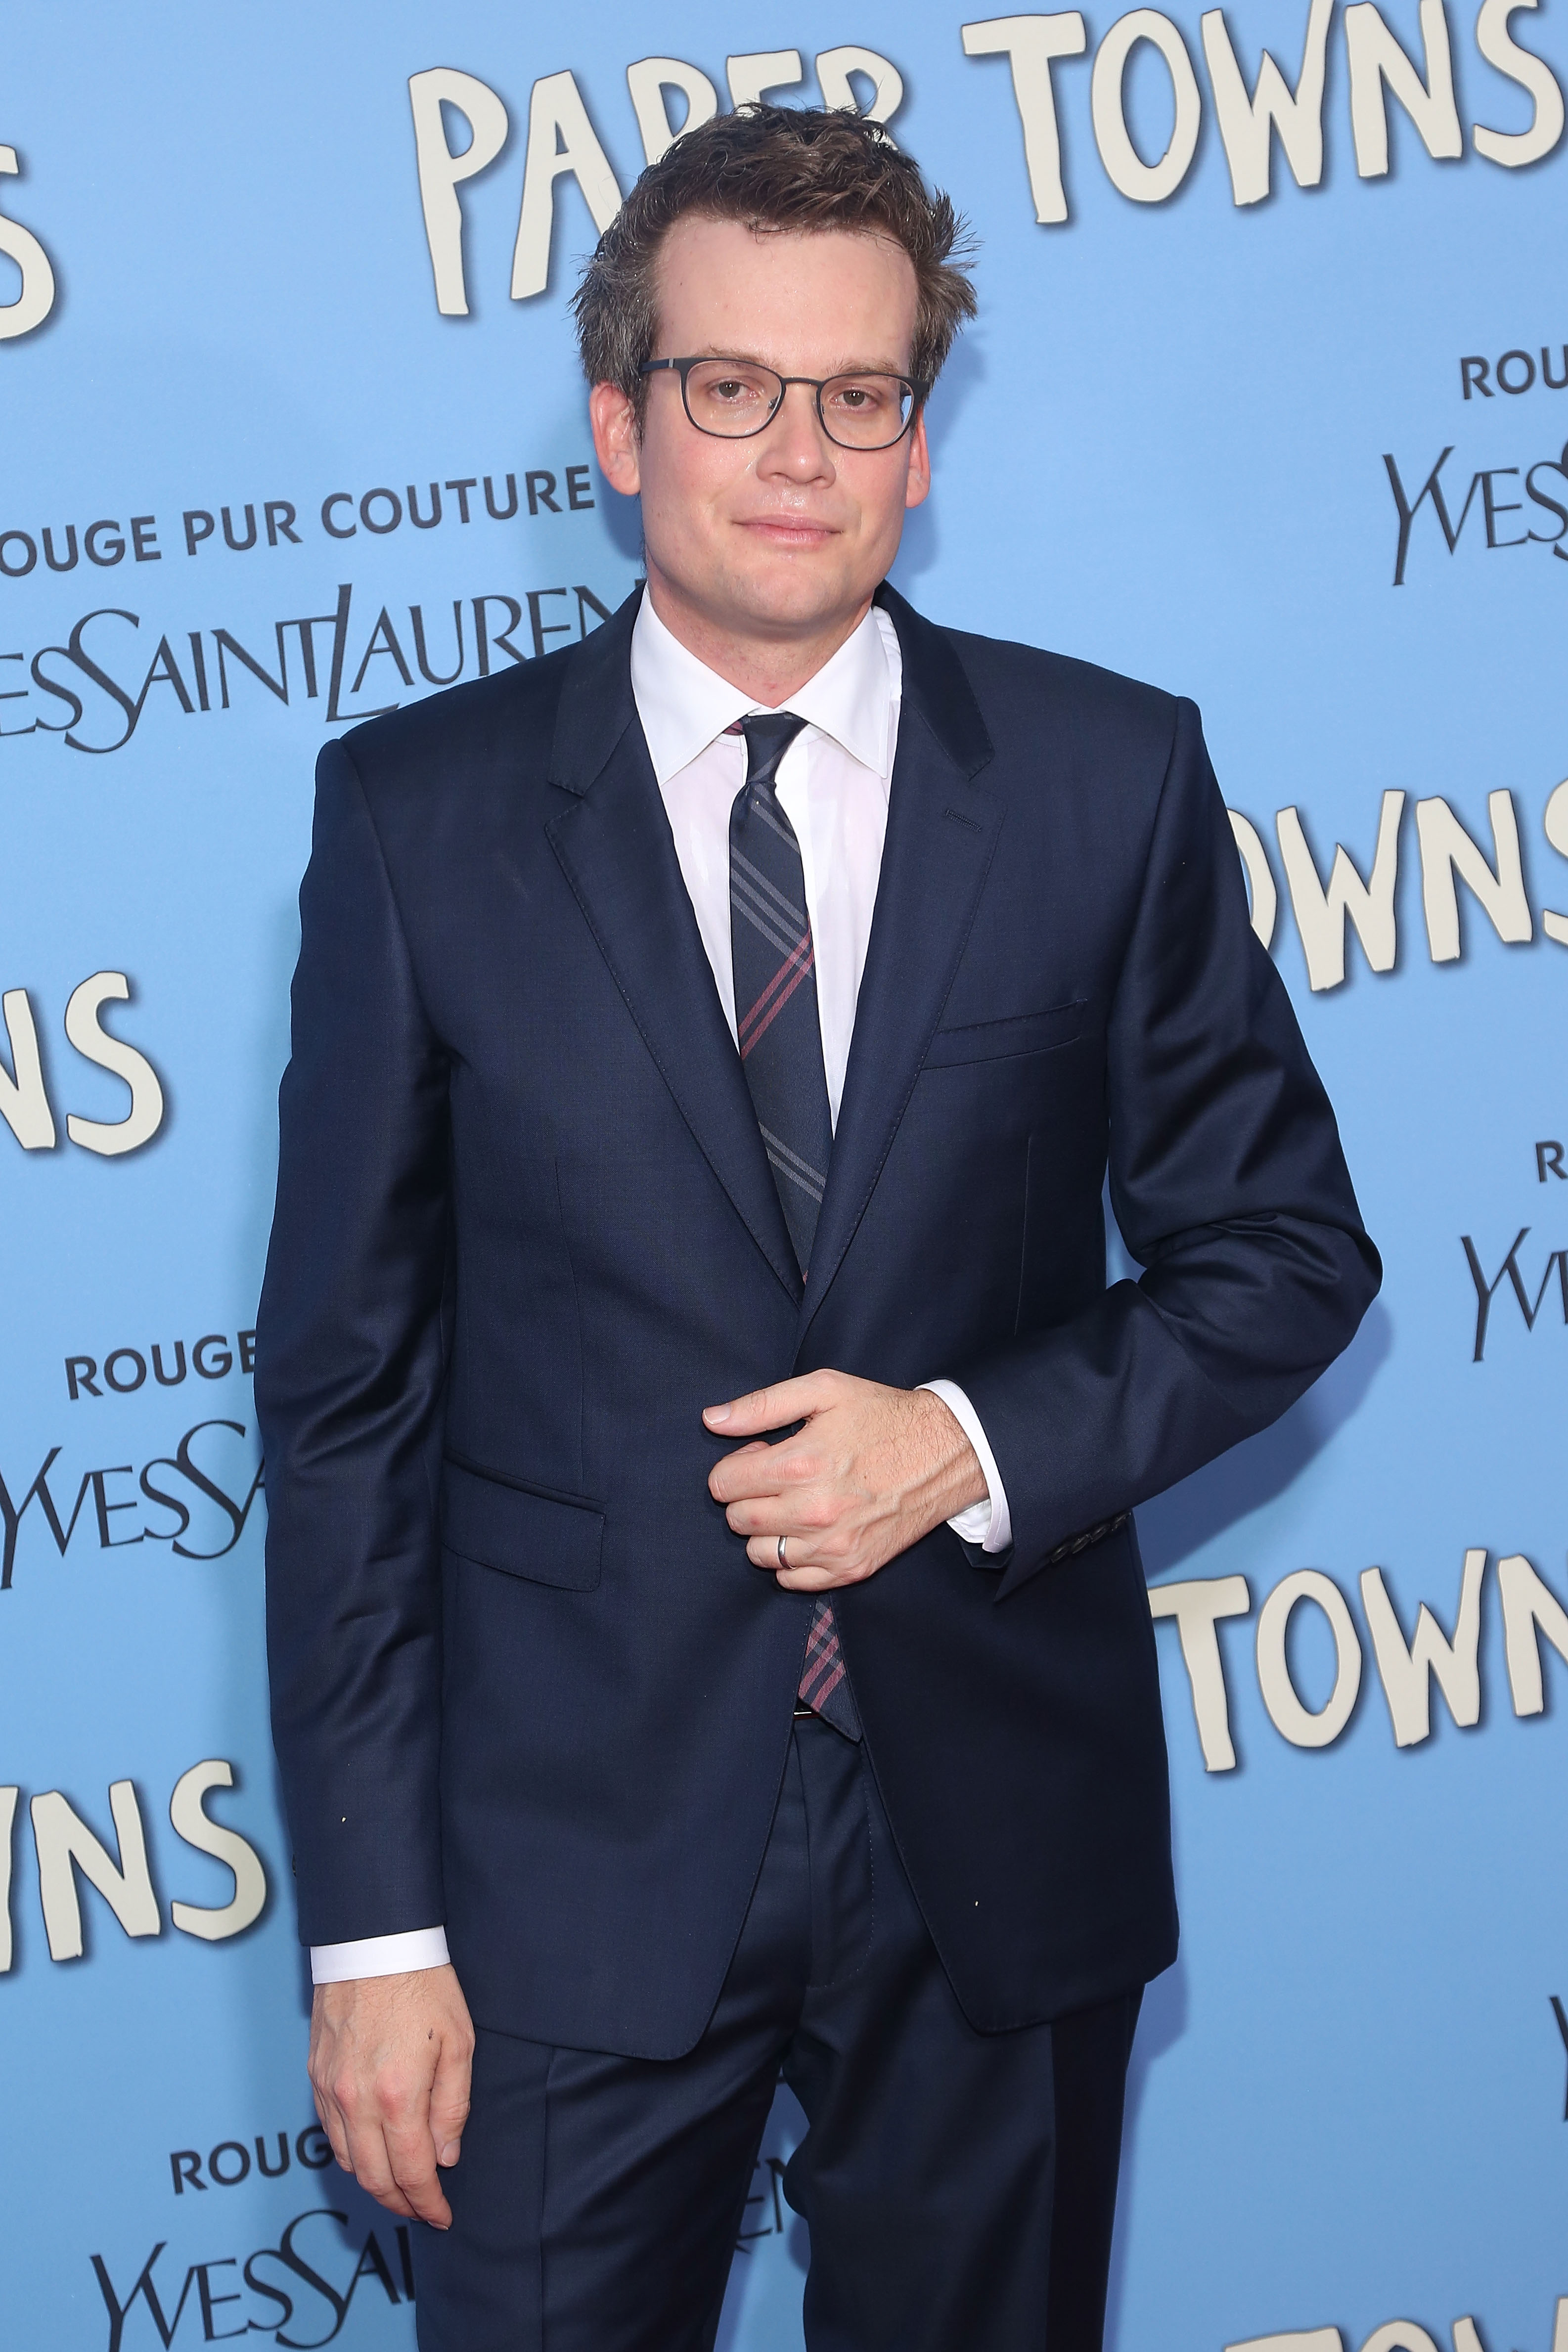 John Green attends the New York City premiere of "Paper Towns" on July 21, 2015.